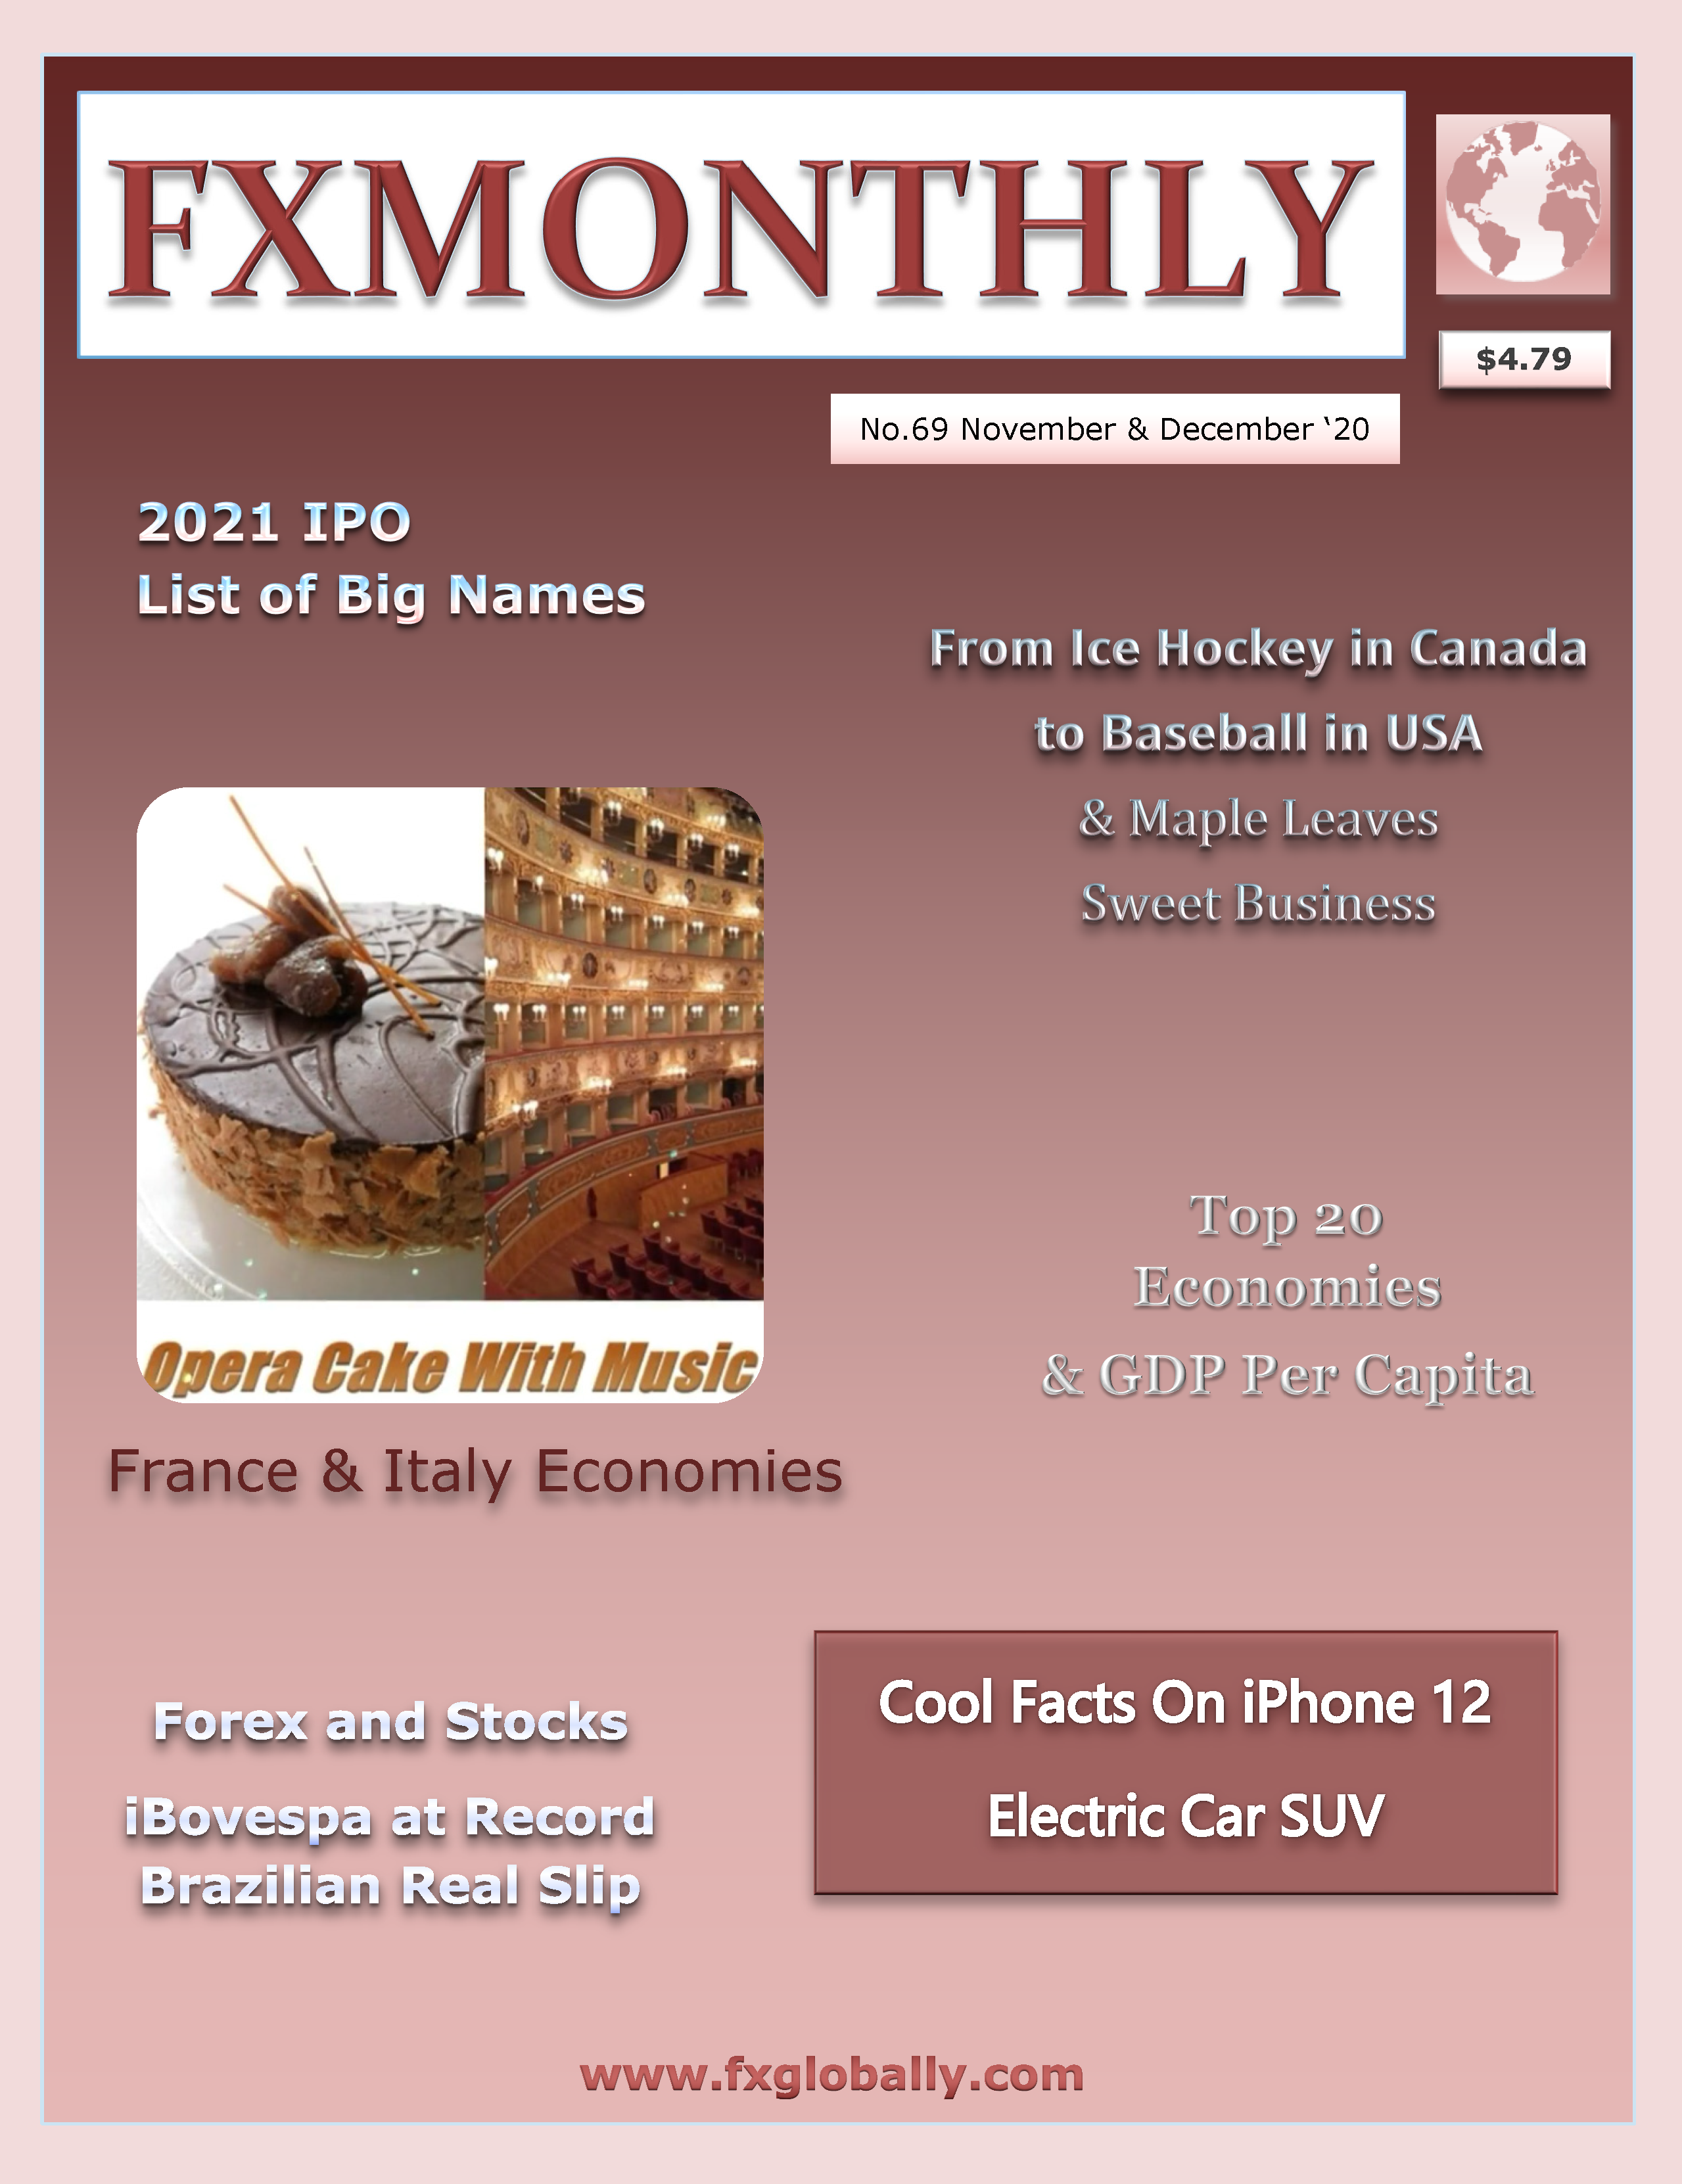 FXMONTHLY 2020 SECOND HALF ISSUES BUNDLE